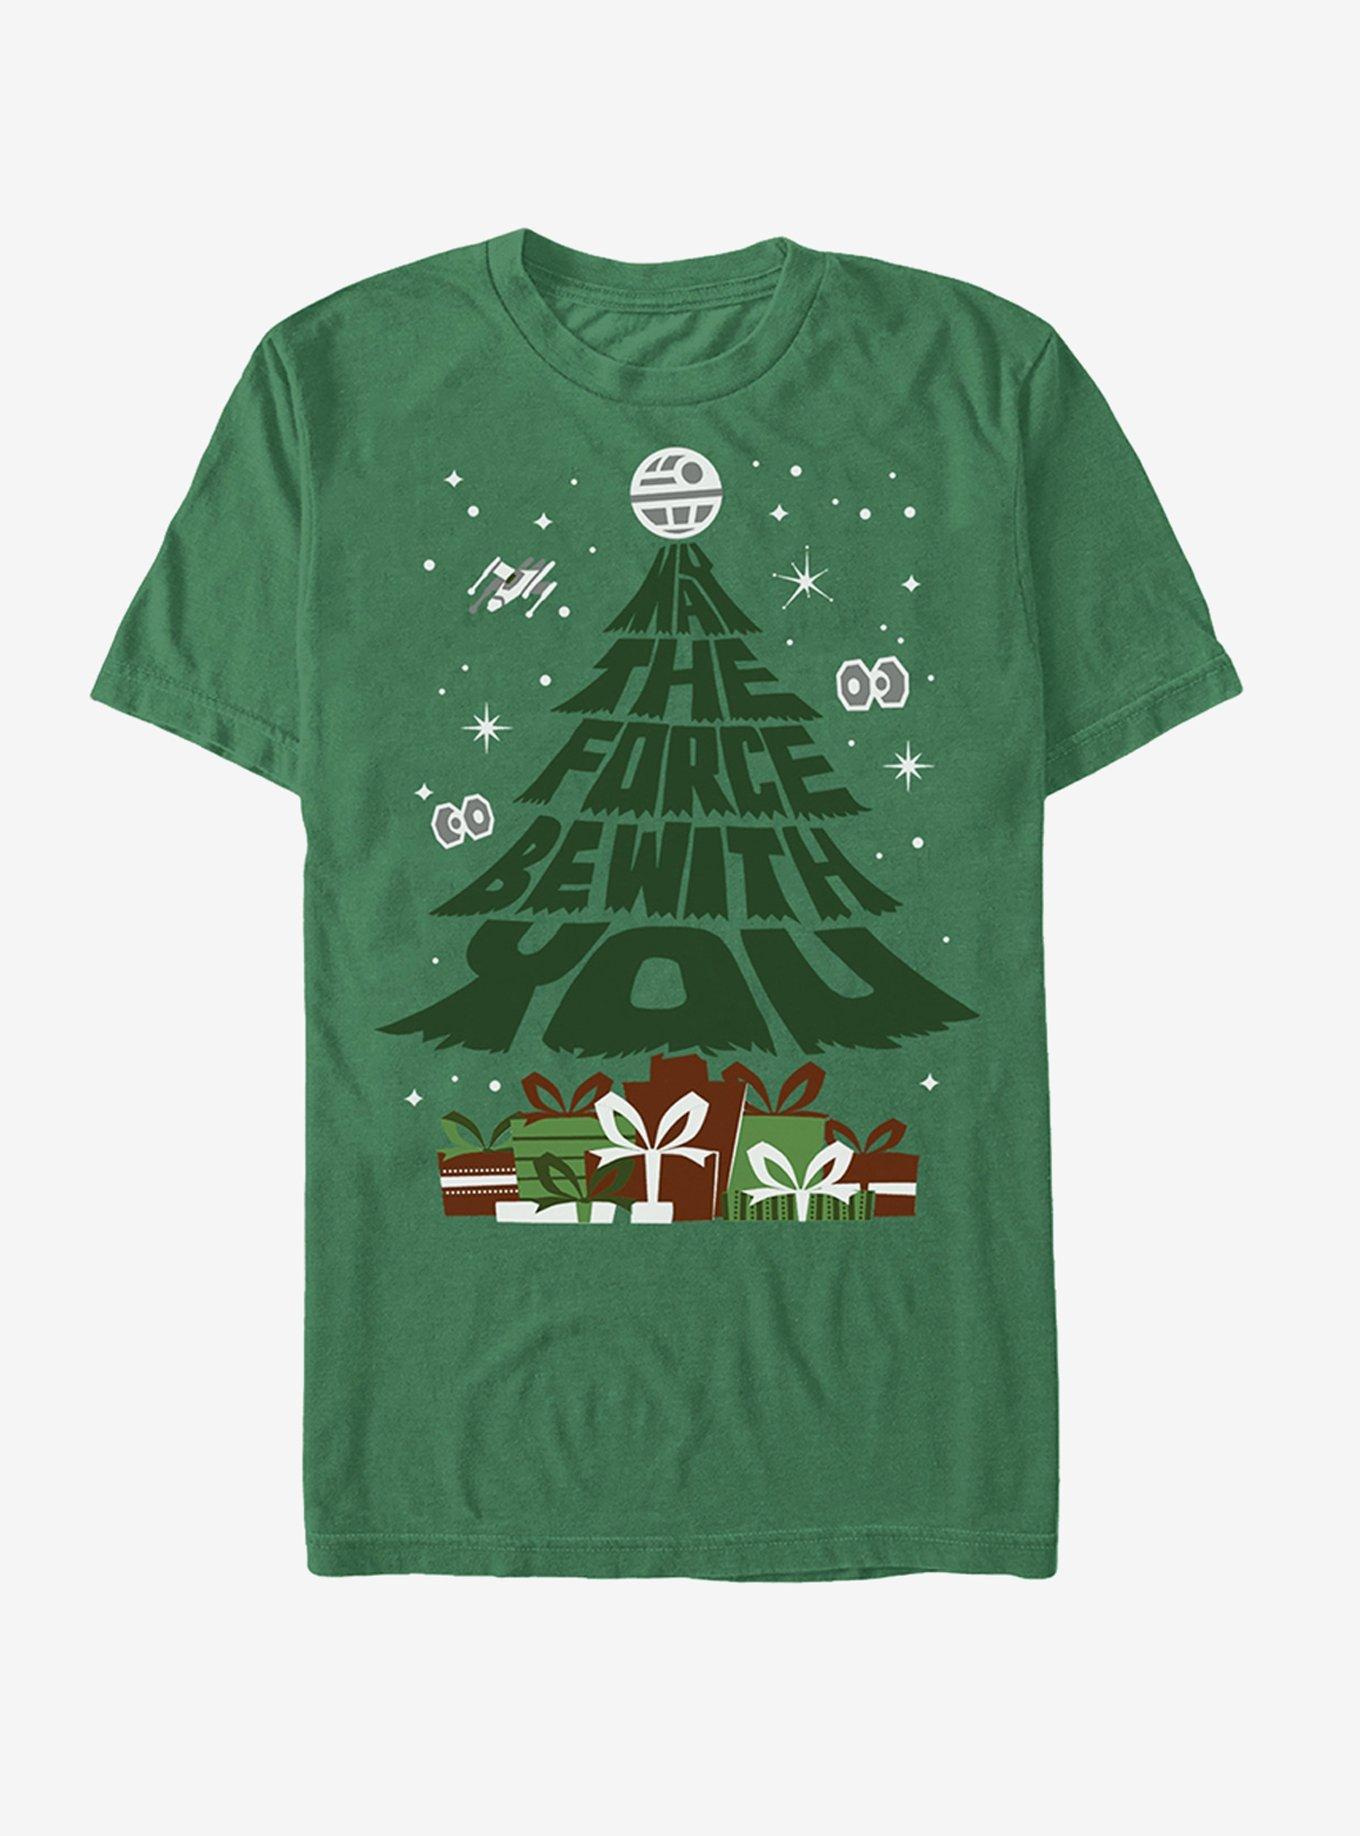 Star Wars Christmas Gifts Be With You T-Shirt, KELLY, hi-res